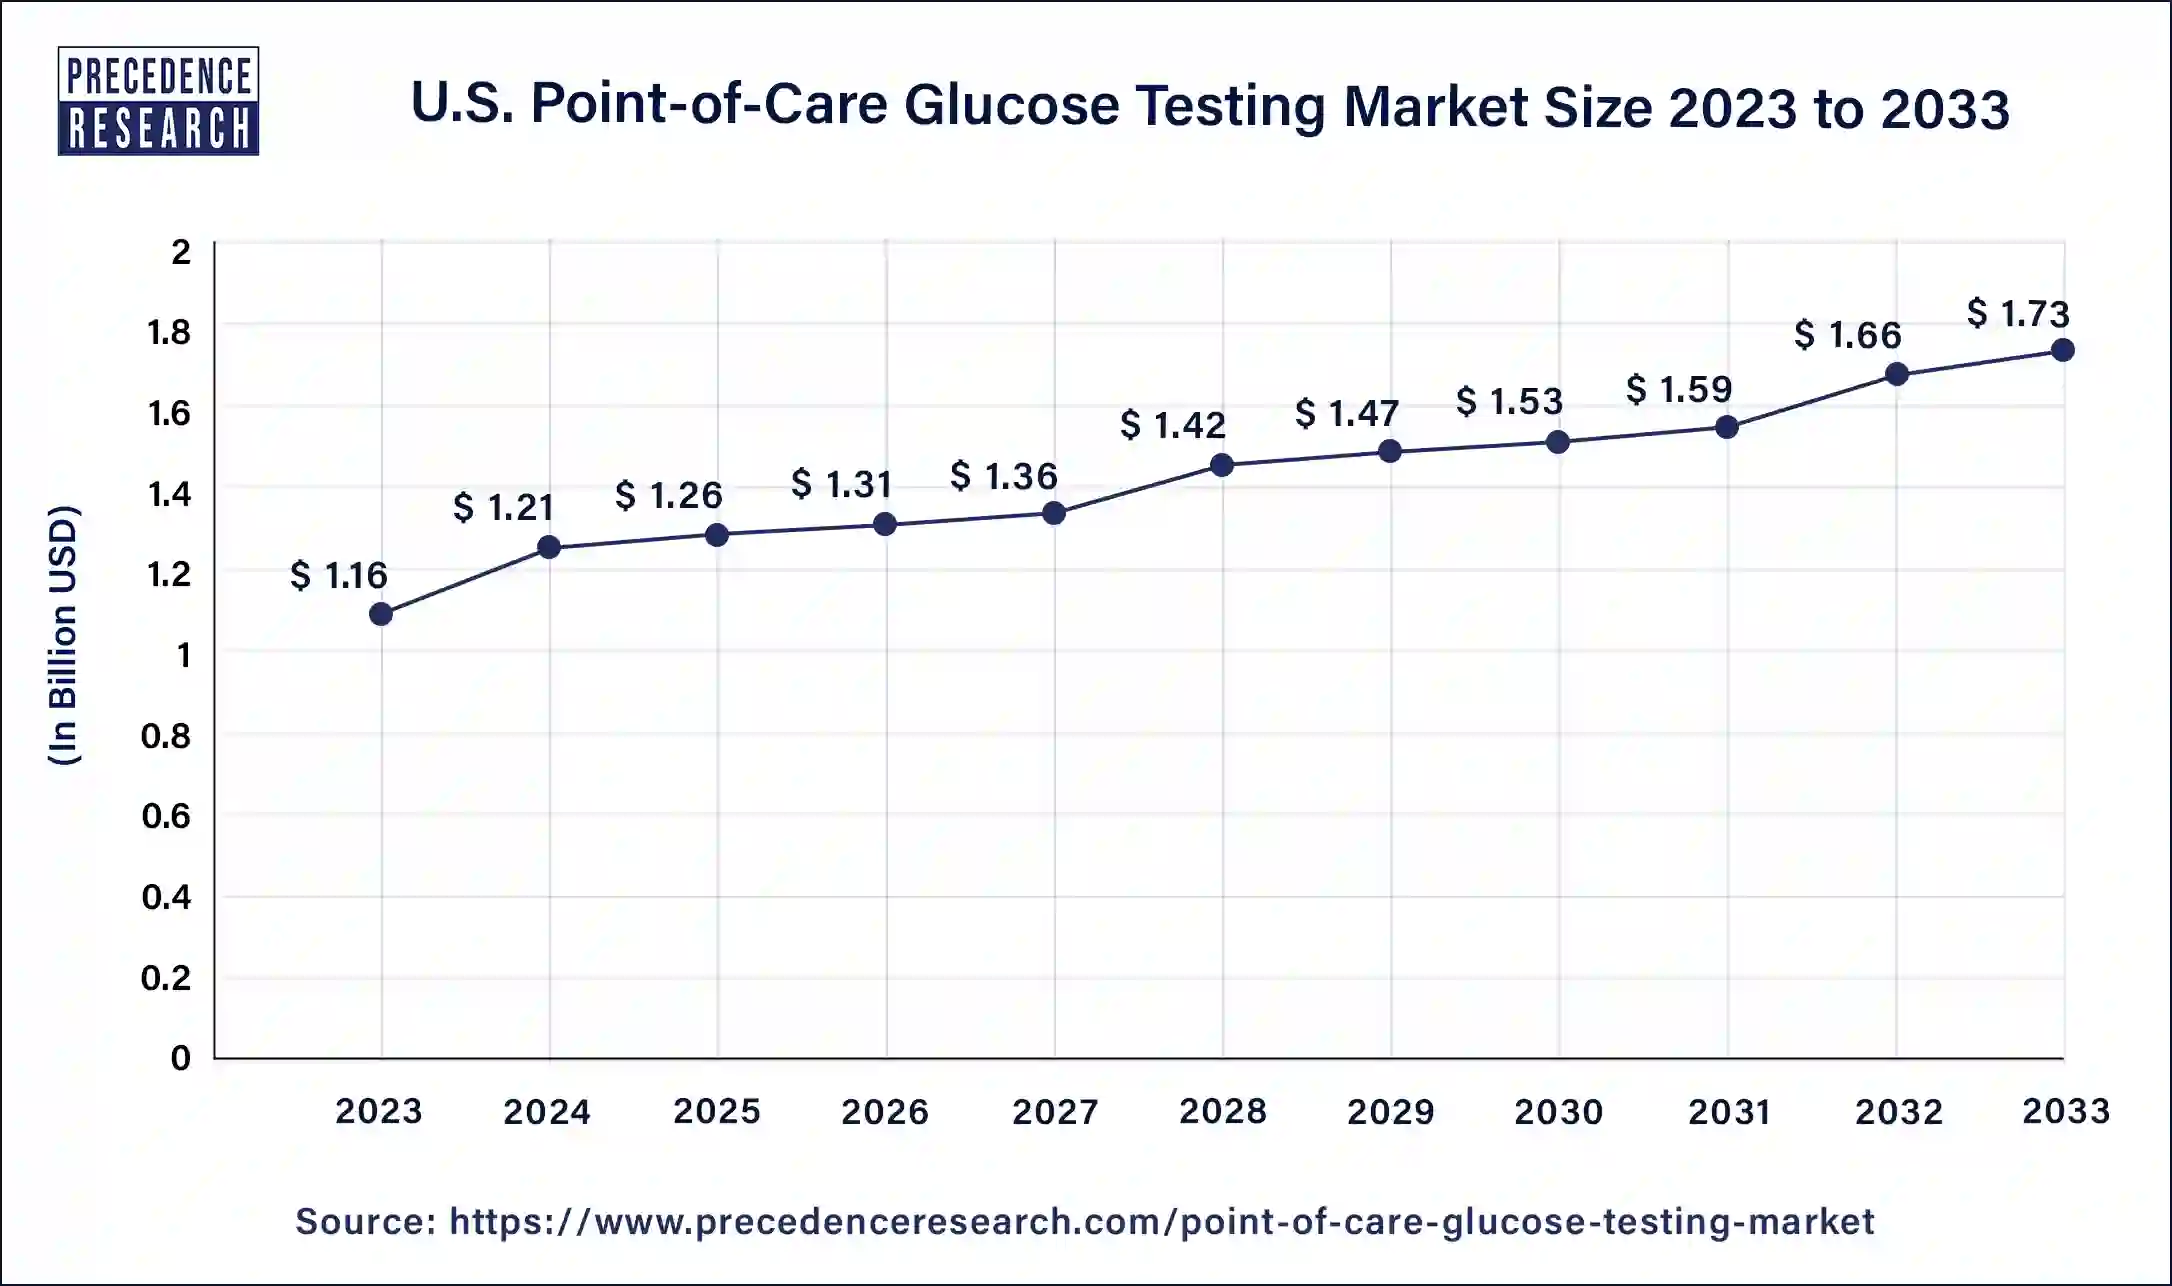 U.S. Point-of-Care Glucose Testing Market Size 2024 to 2033